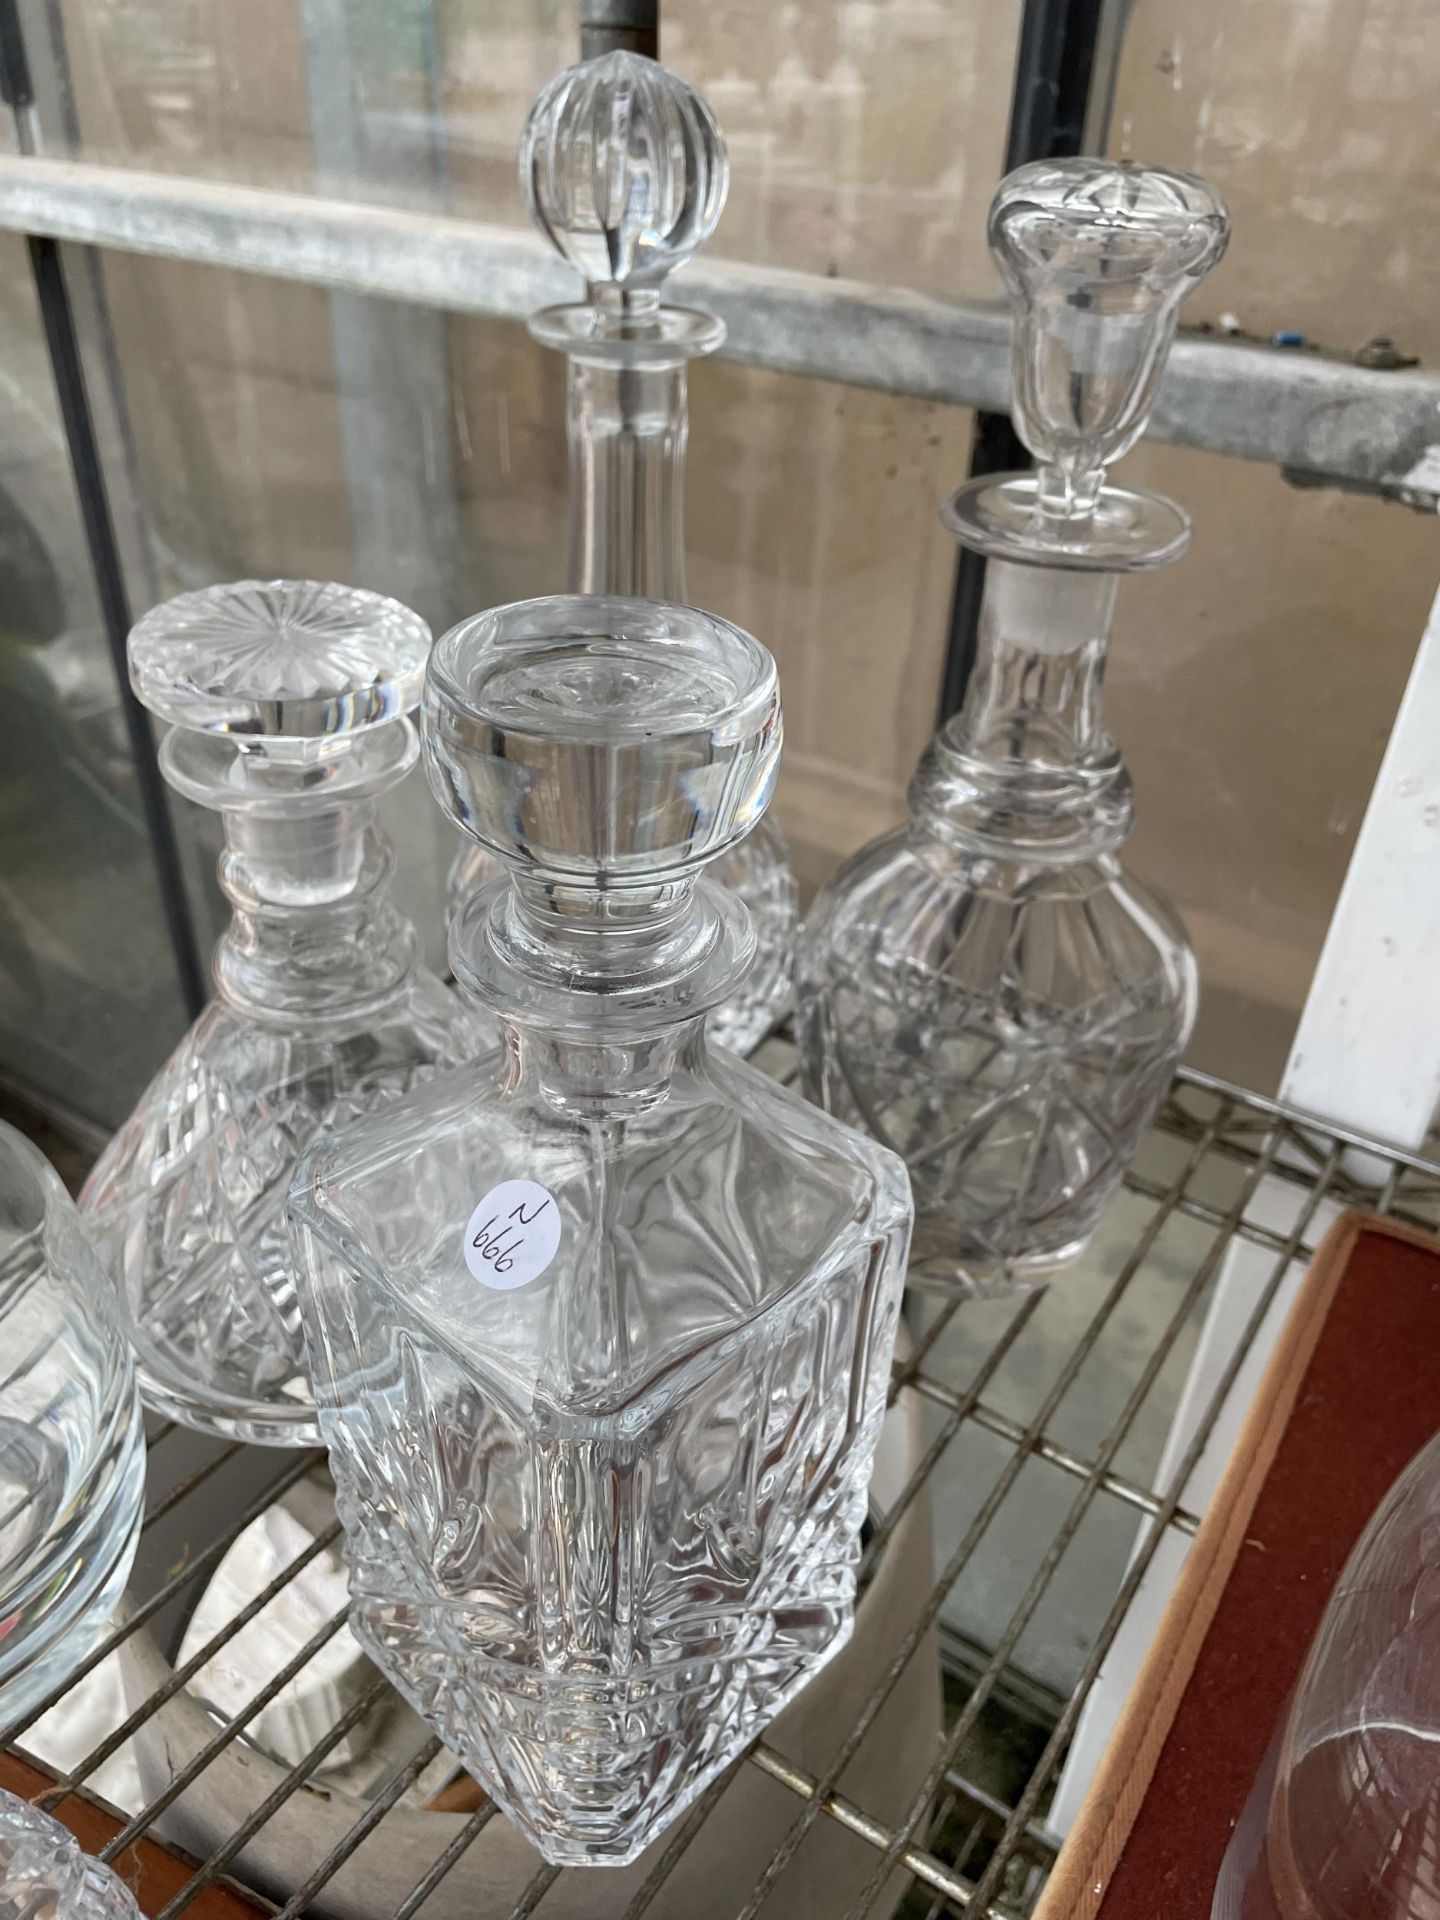 SIX VARIOUS CUT GLASS DECANTERS AND A FURTHER GLASS DECANTER WITH STOPPERS - Image 3 of 3